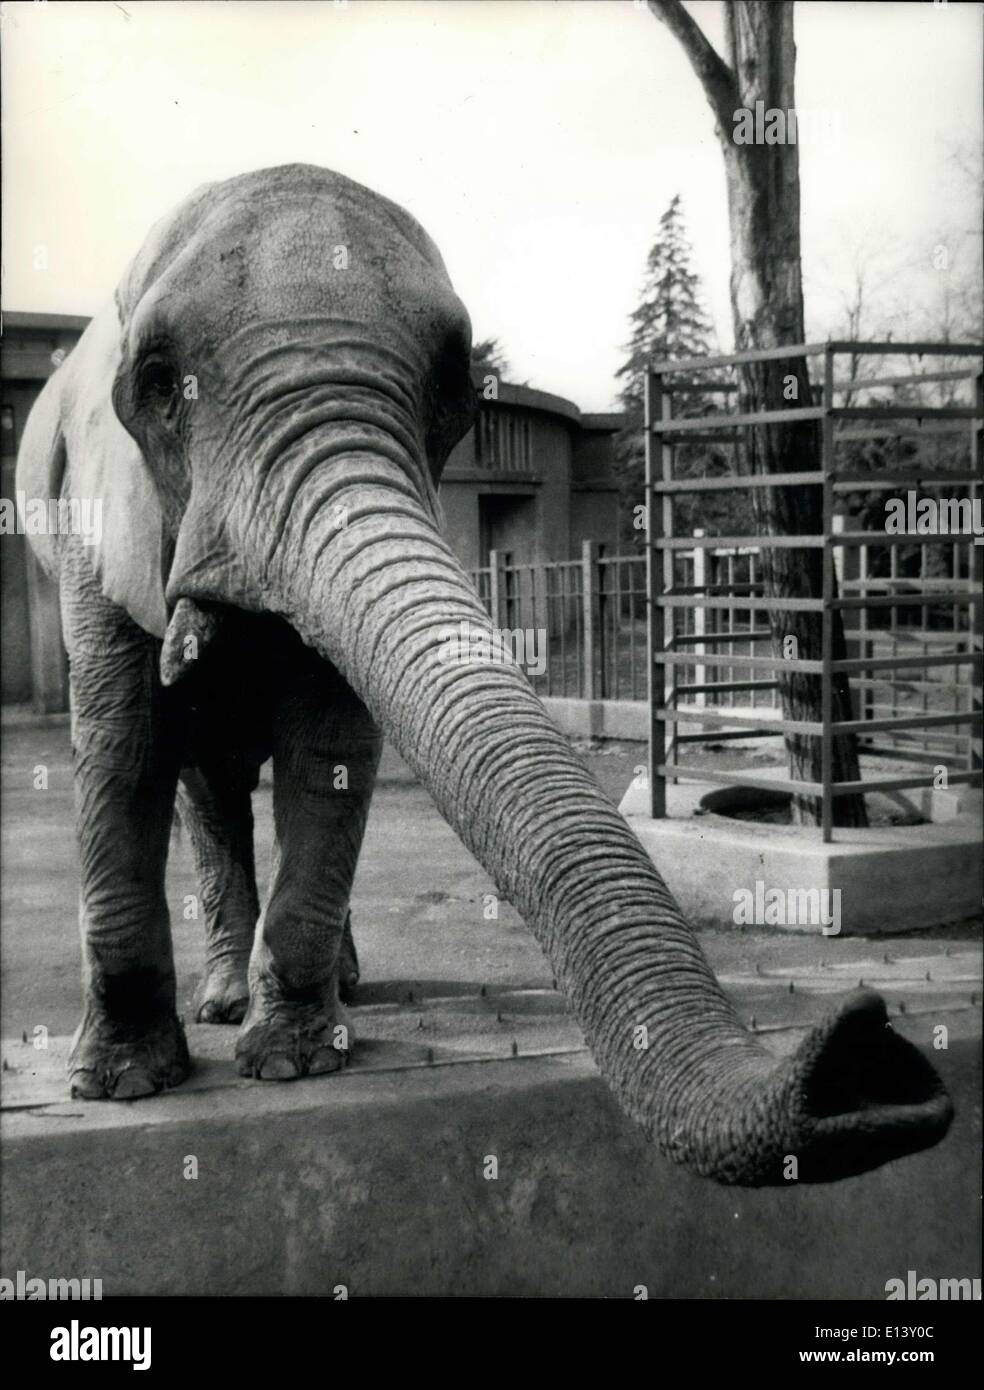 Mar. 31, 2012 - The Co: The time in Rome is now very cold and the animals that live in the zoo react in different manners as their ancestors. Photo shows the elephant seems to ask a warm punch. Stock Photo